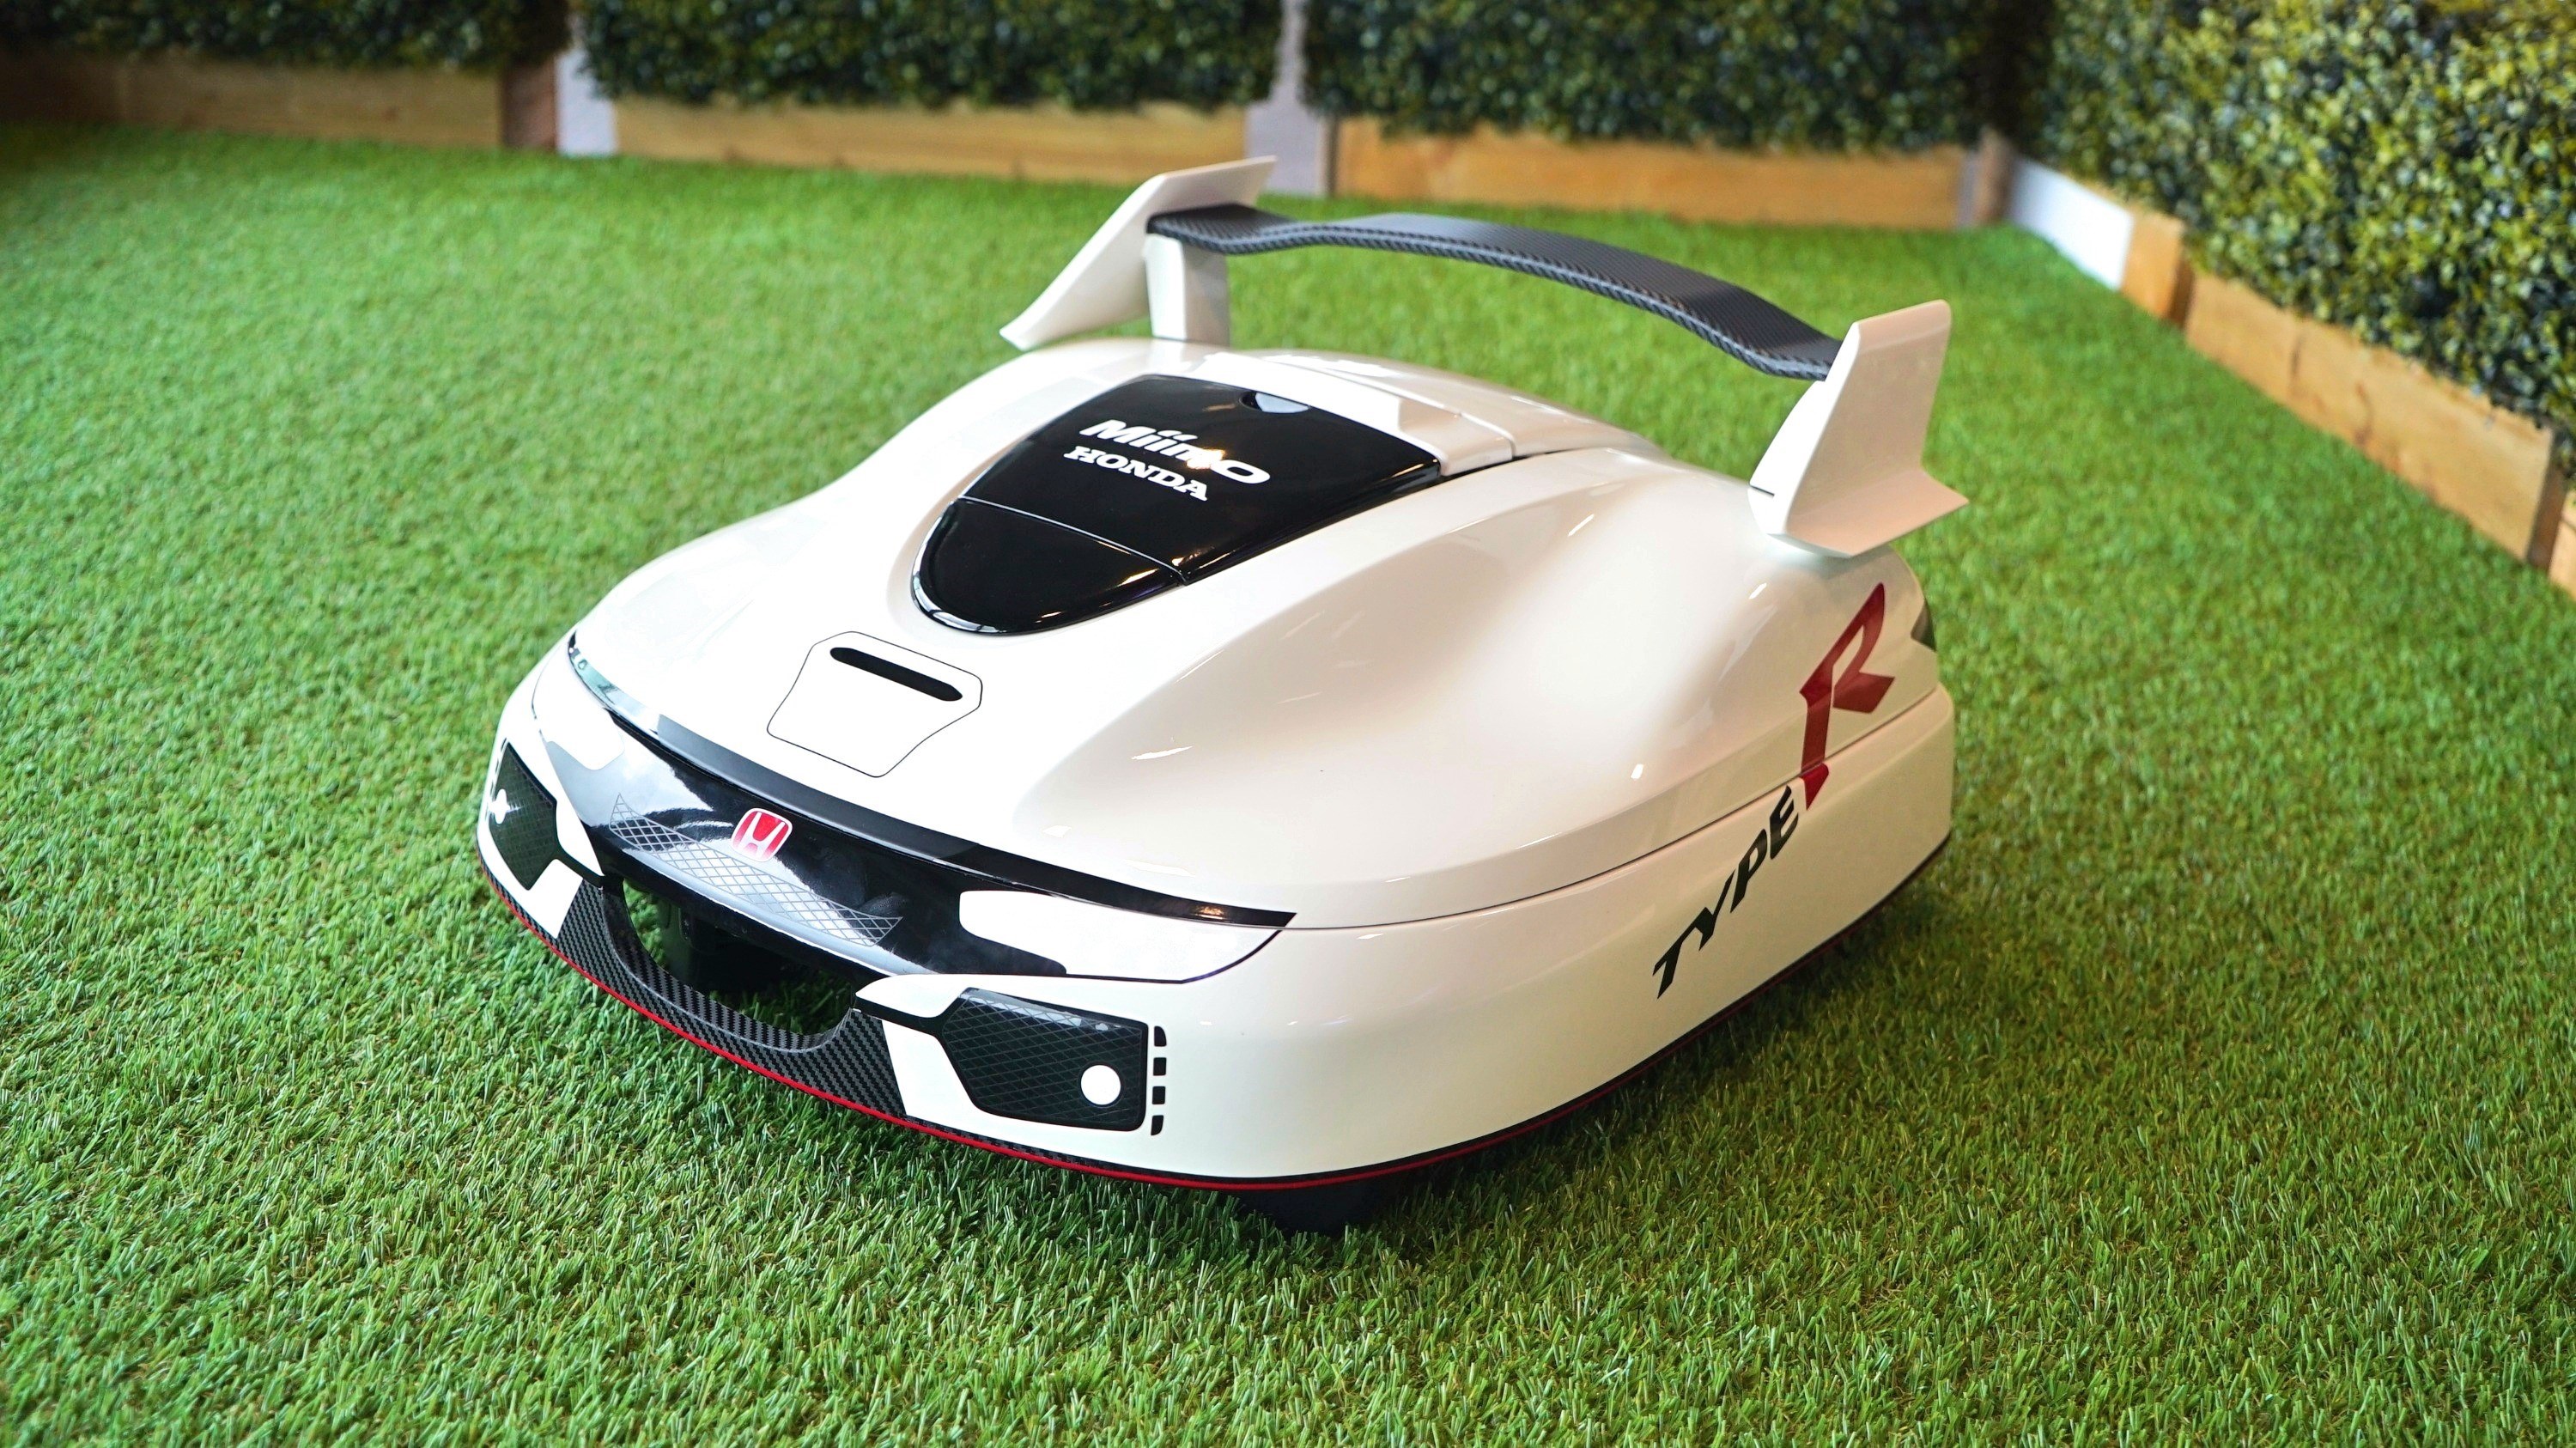 Honda Creates Civic Type R-Inspired Lawn Mower, Lets The Haters Hate ...